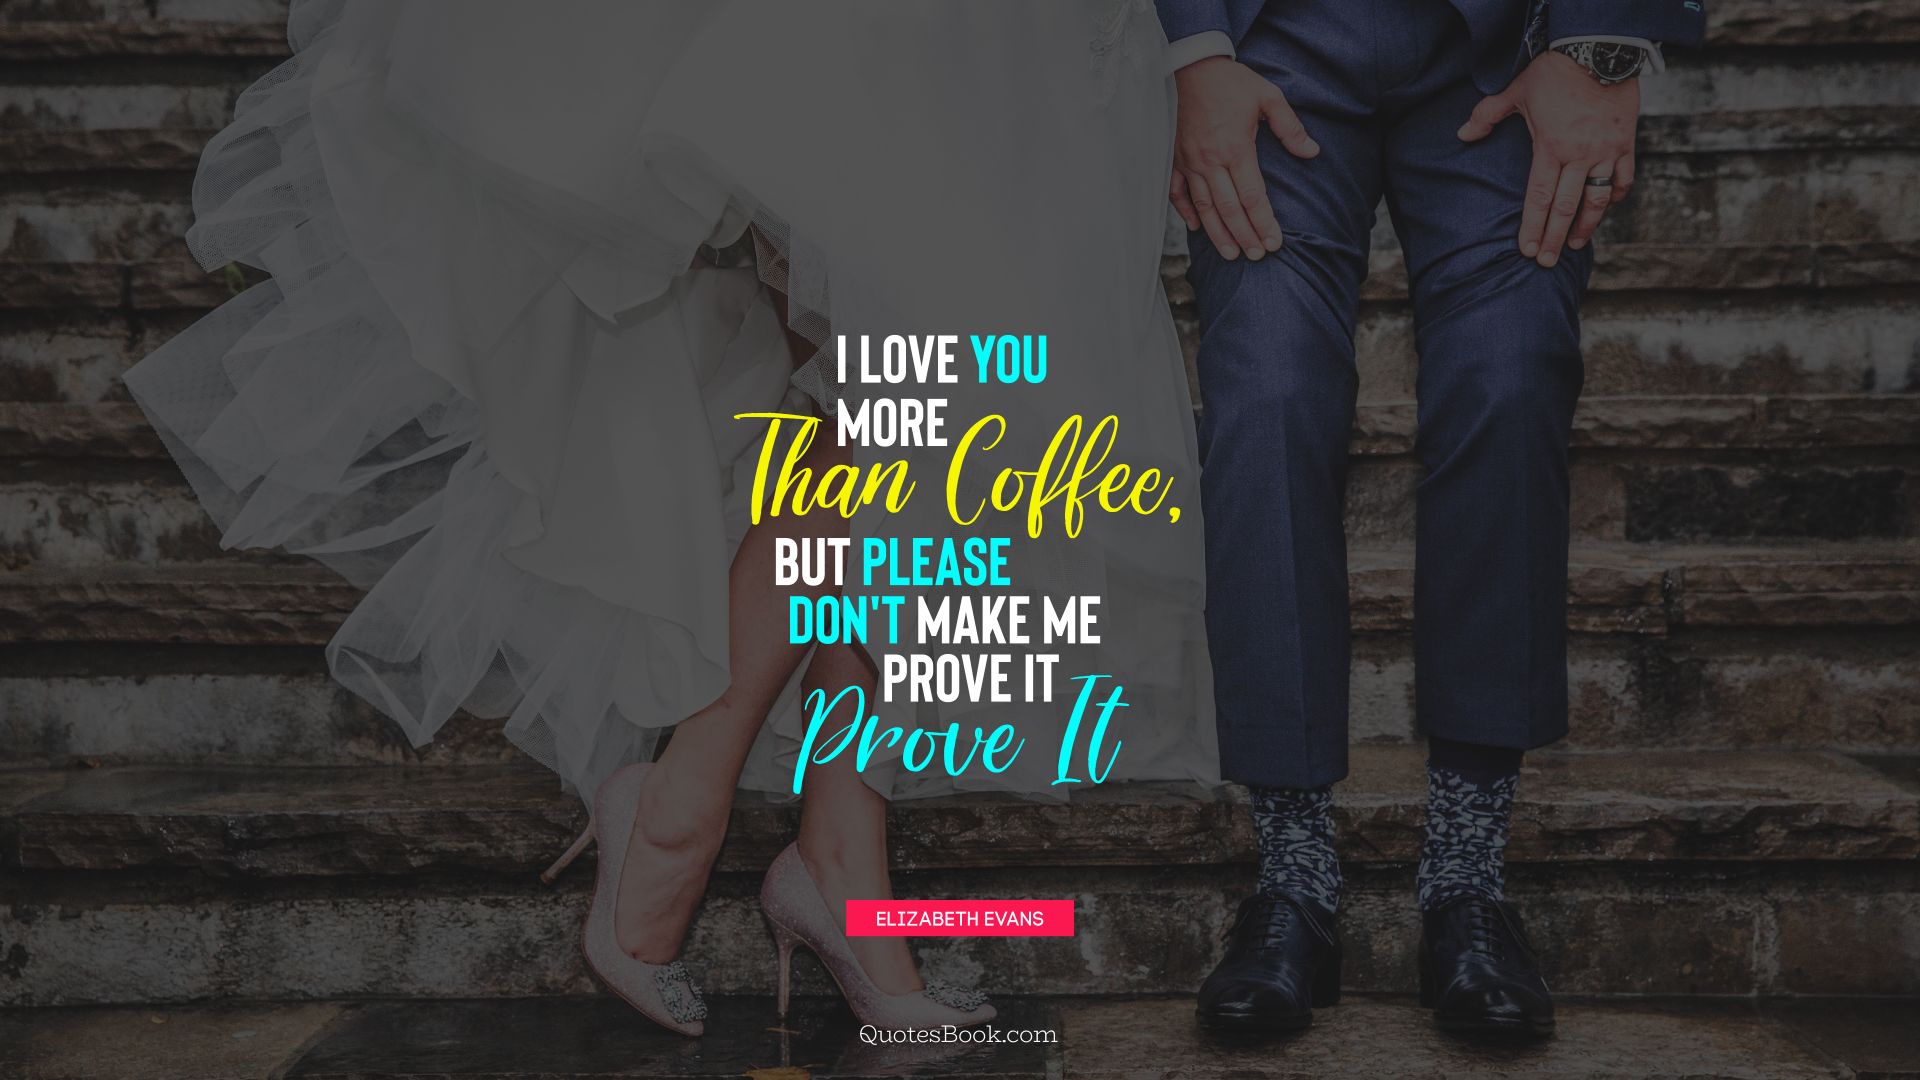 I love you more than coffee, but please don't make me prove it. - Quote by Elizabeth Evans